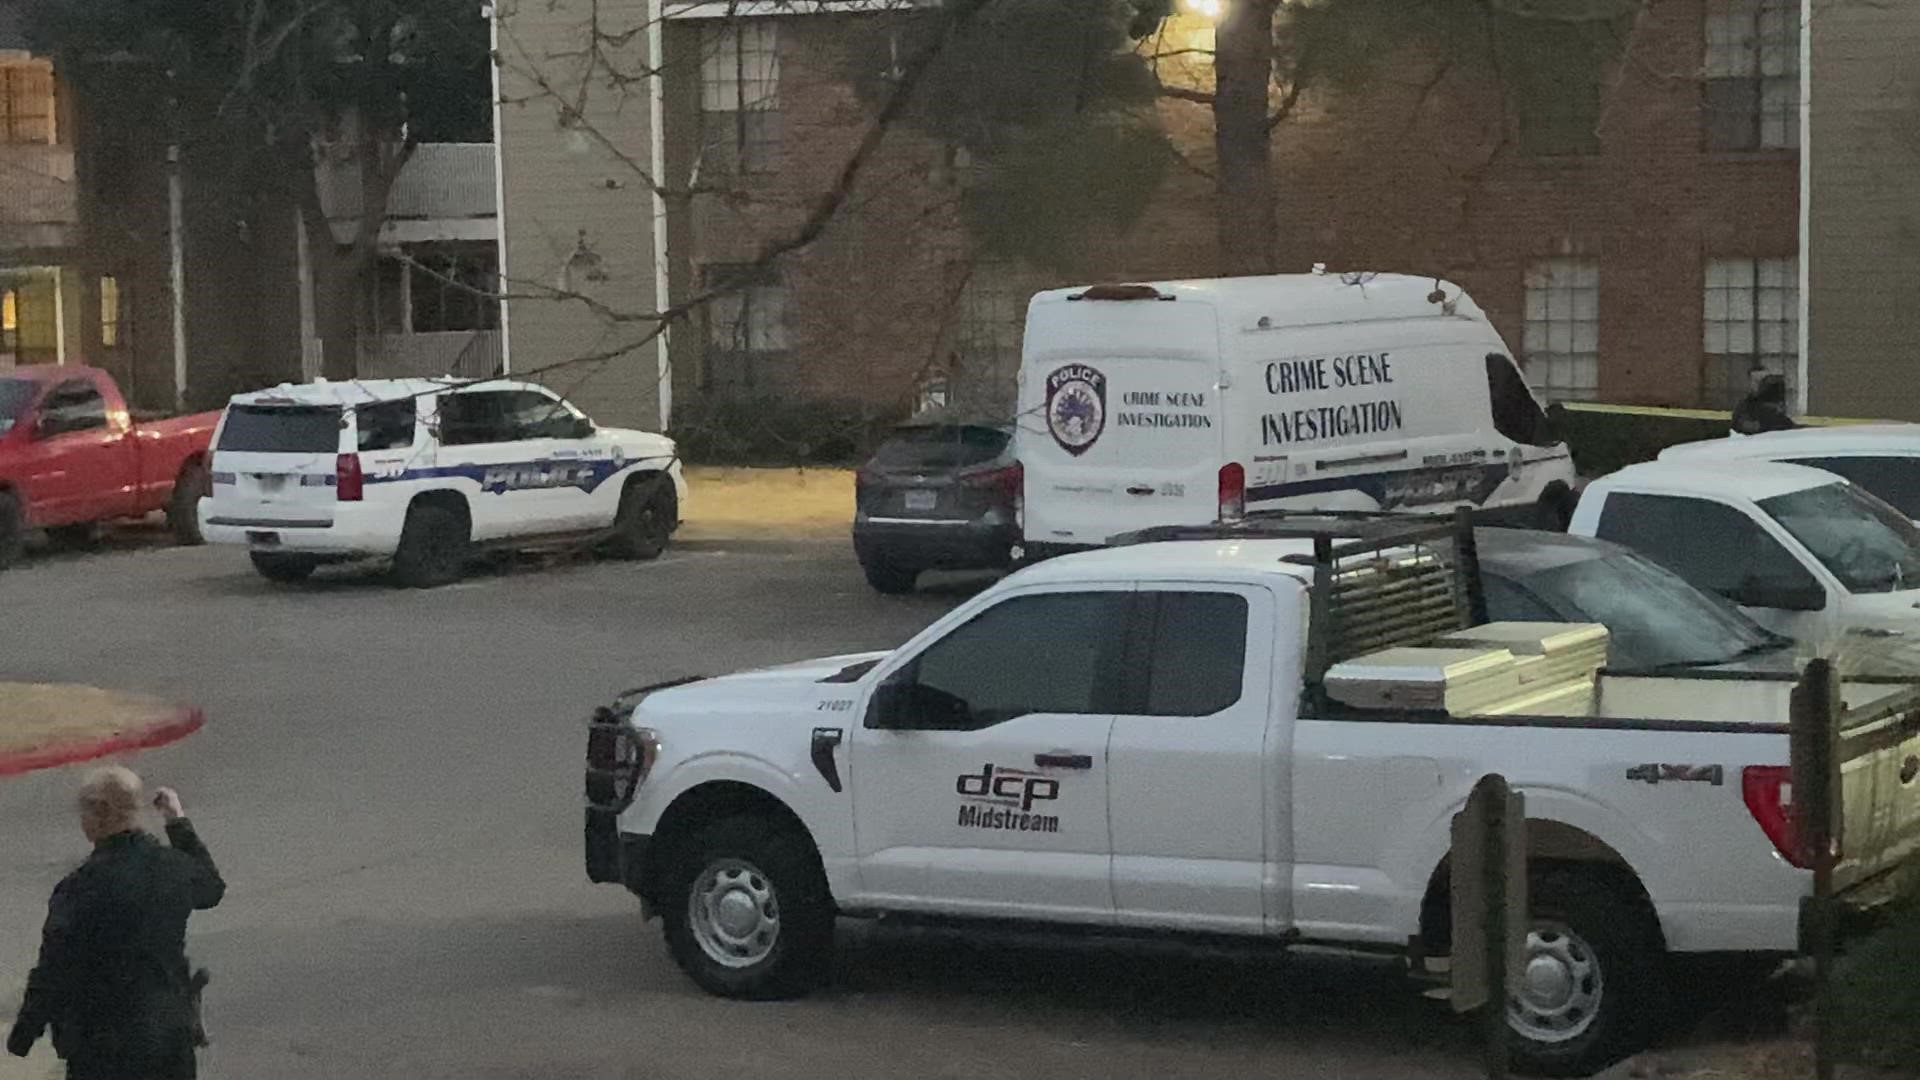 A spokesperson said the man was left in a courtyard at the Clusters Apartments.